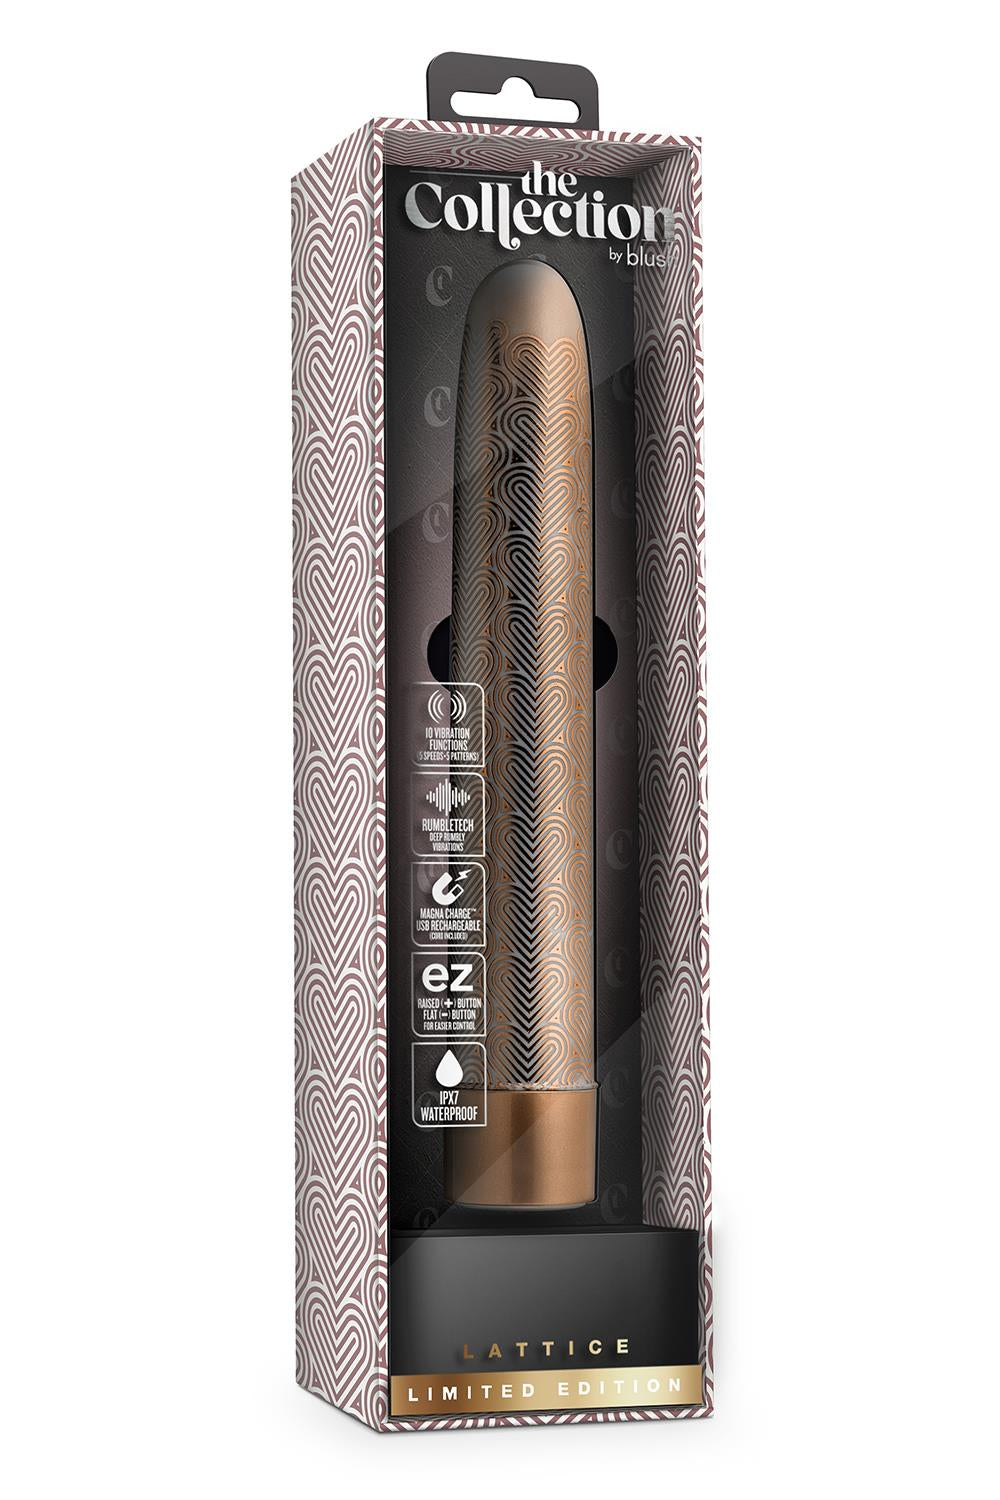 The Collection Lattice Slimline Vibrator - Rose Gold Packing